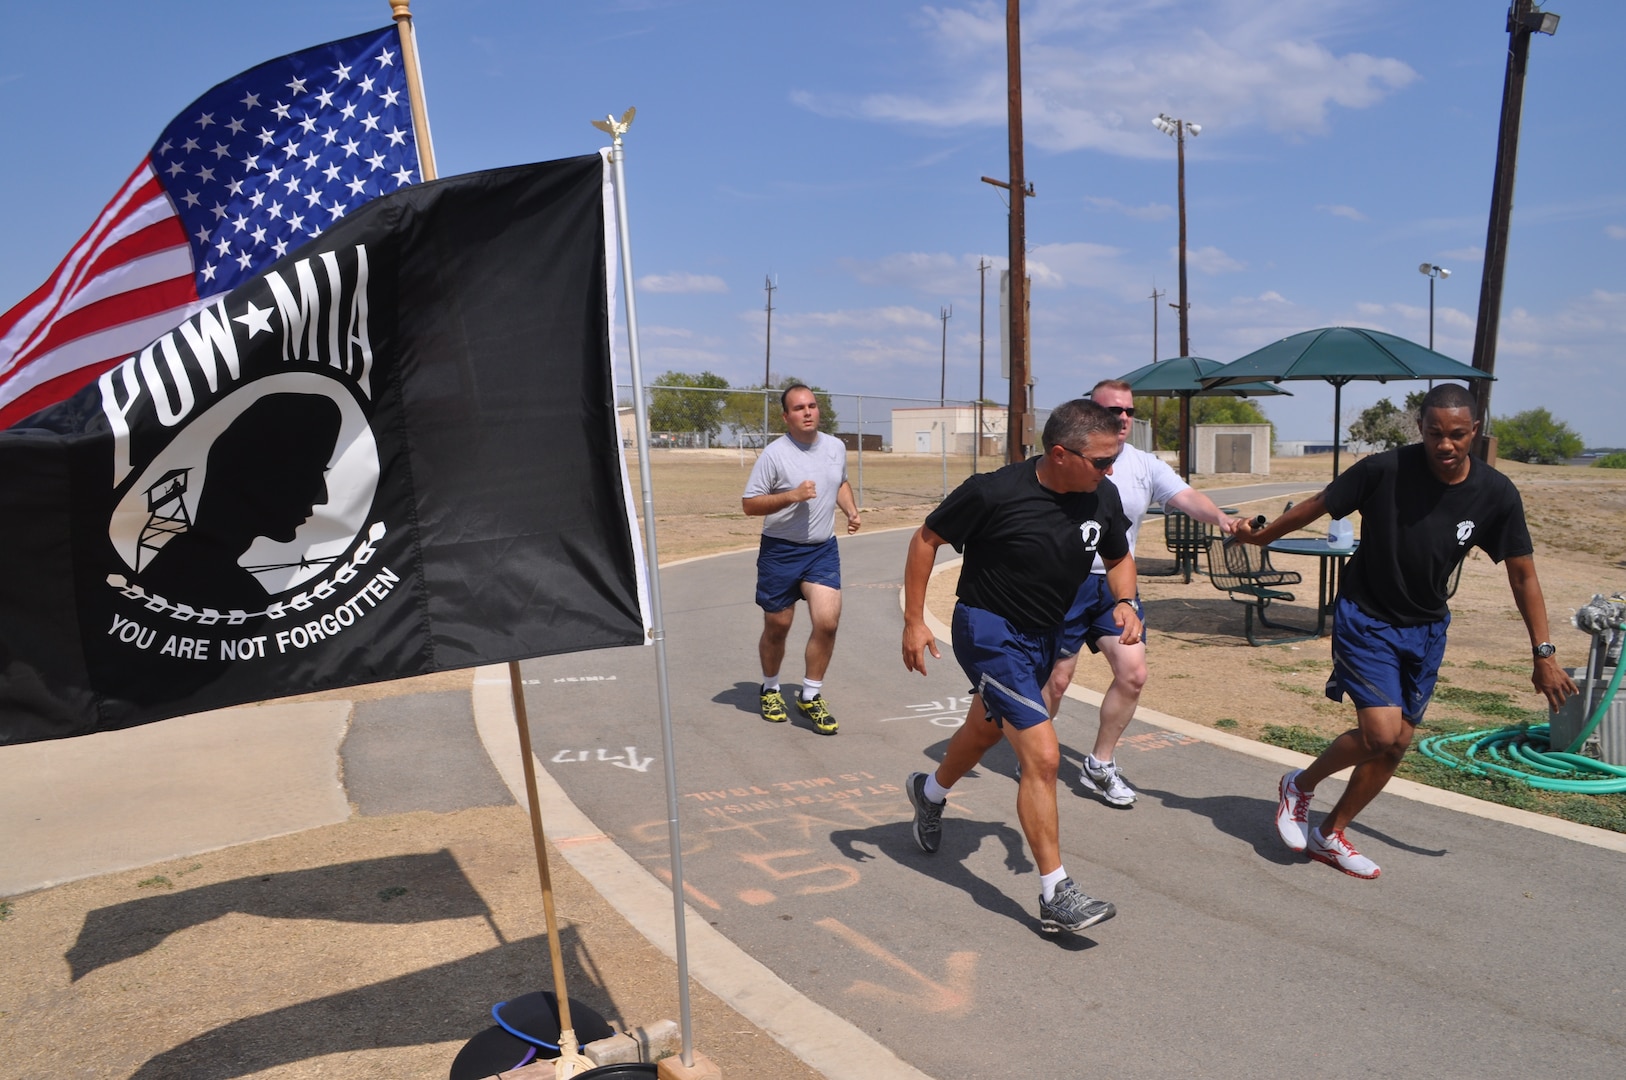 Technical Sgt. Gary Harris, a 24th Air Force personnelist, hands off the baton to Maj. James Hale, 26th Network Operations Group, during the 24-hour POW/MIA Vigil Run at the Gillum Fitness Center track, Lackland Air Force Base, Texas, Sept. 15. Volunteers also read aloud the names of American military members listed as prisoners of war or missing in action. Cyberspace operators and support personnel from across 24th Air Force units participated in the Lackland Security Hill vigil. (U.S. Air Force photo by Tech. Sgt. Scott McNabb)